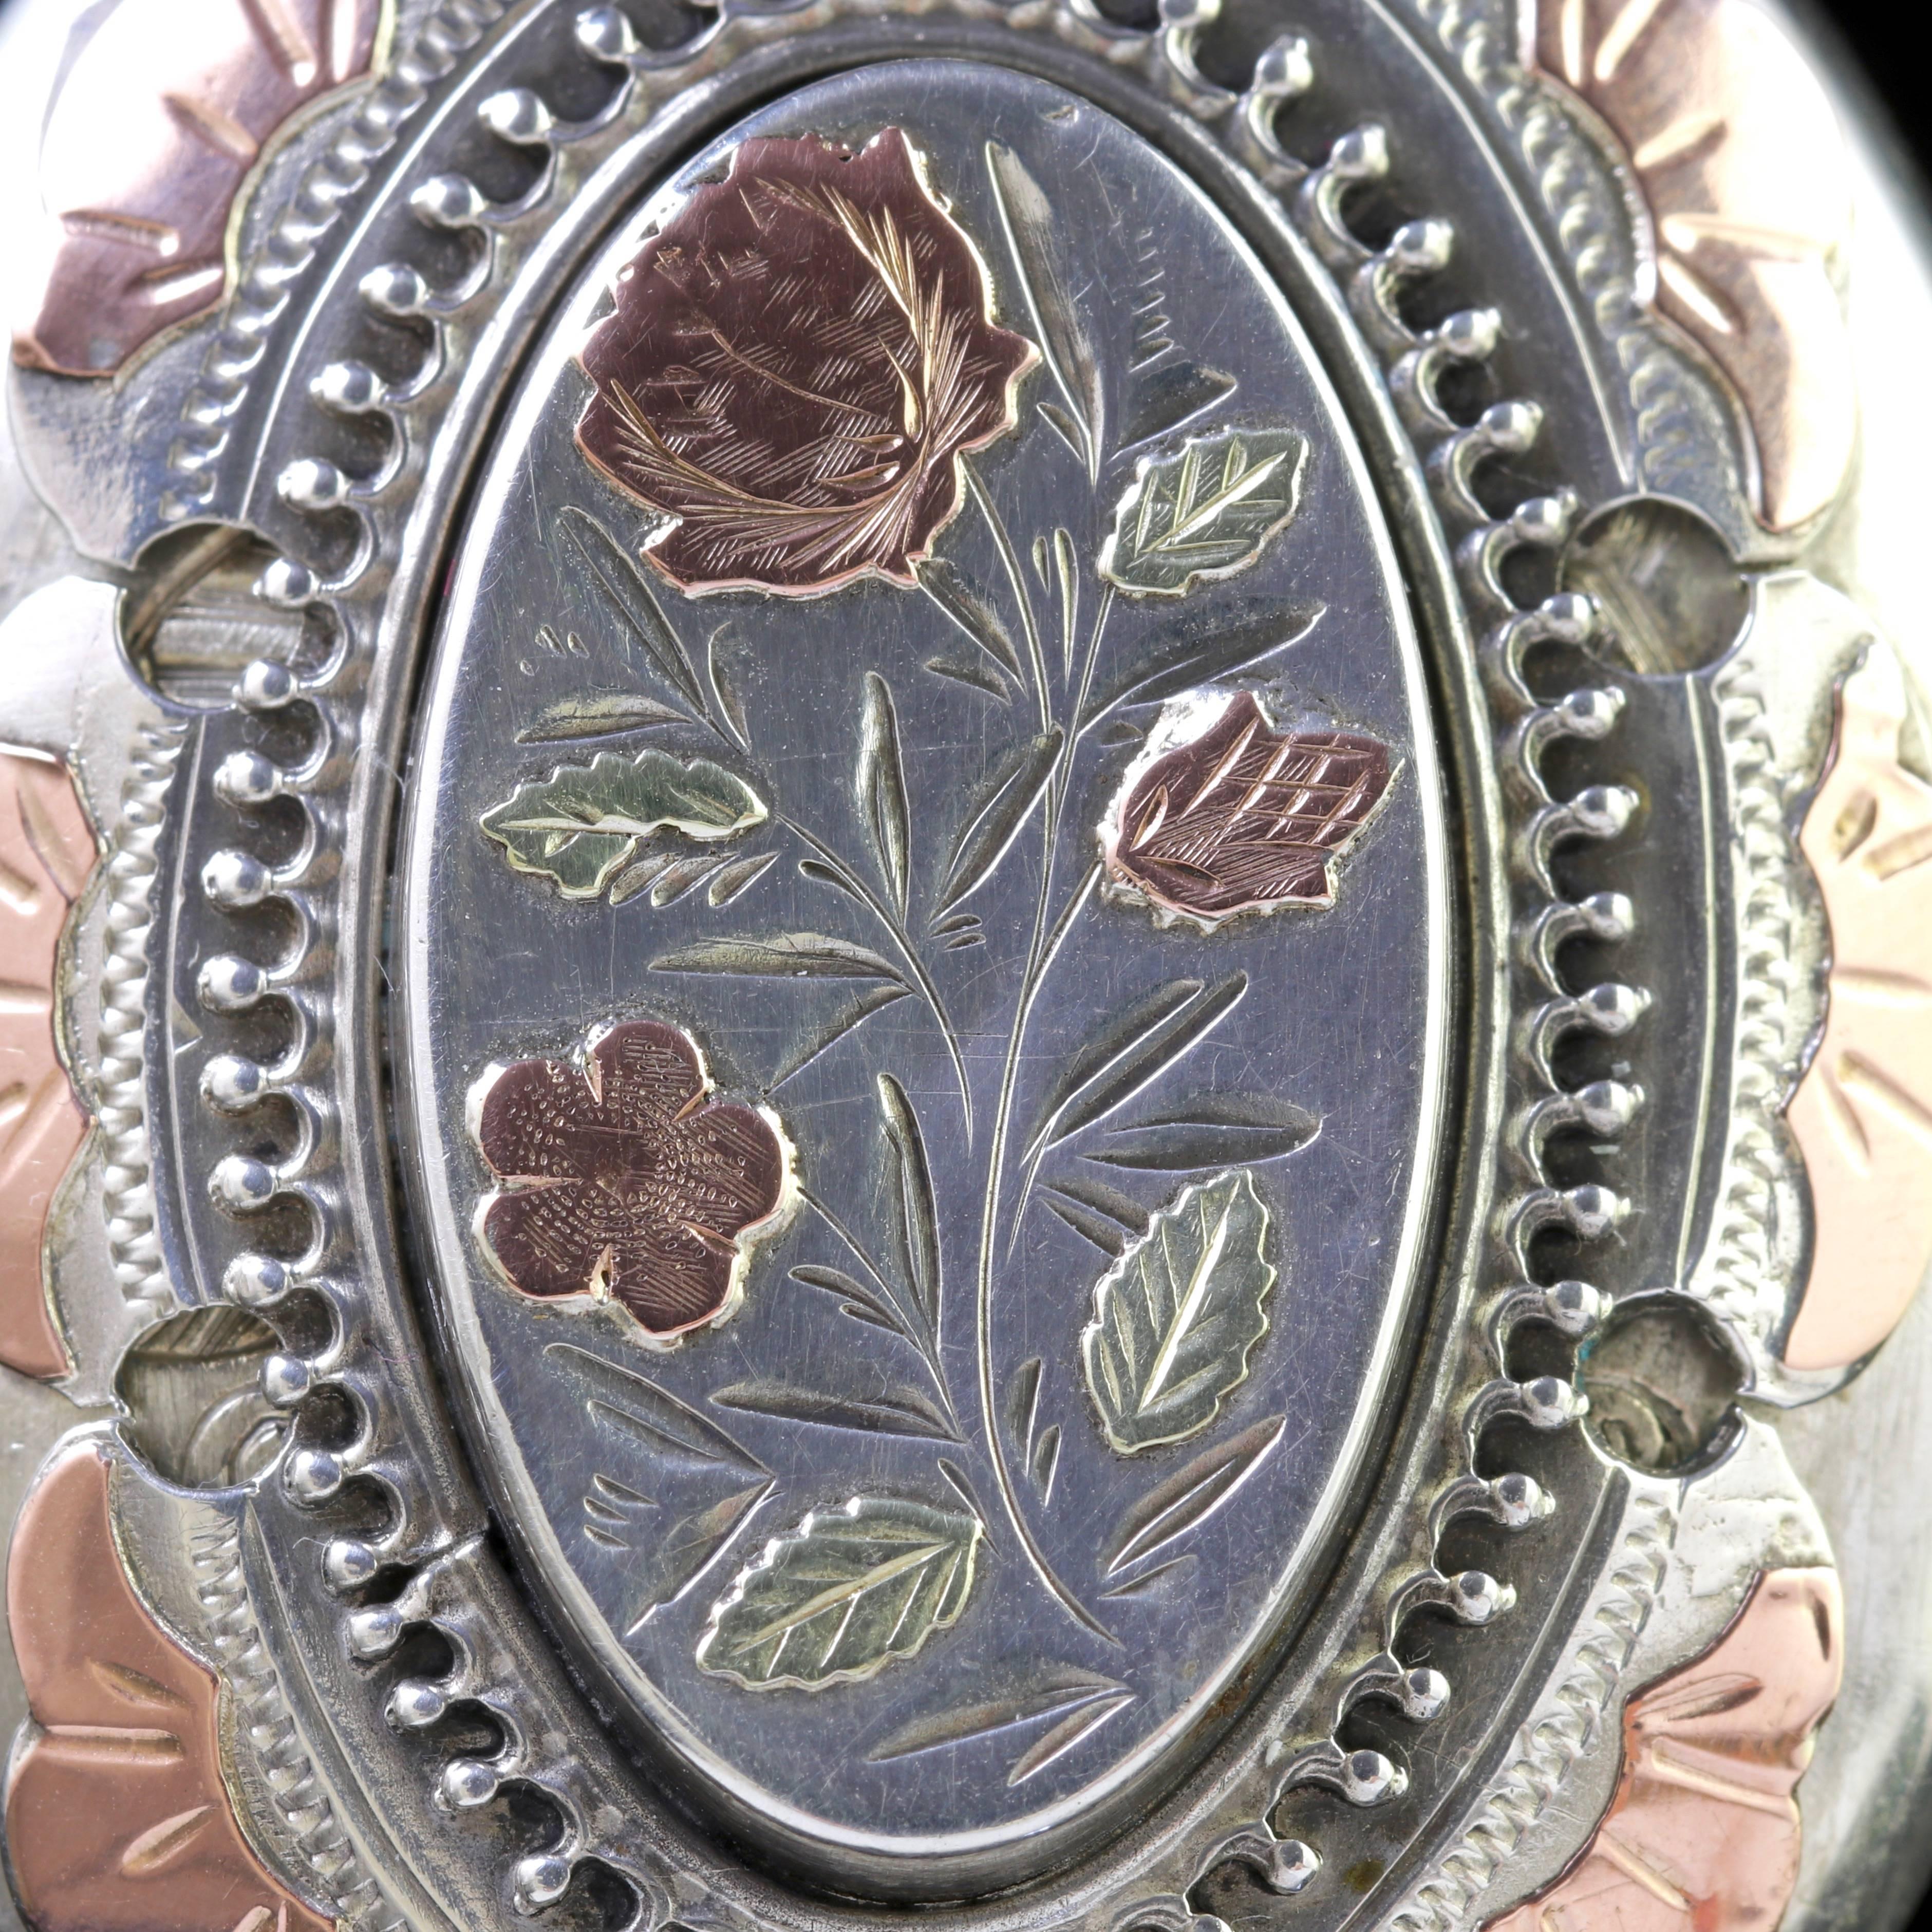 To read more please click continue reading below-

This is one of the most beautiful Lockets Laurelle Ltd has ever exhibited for sale. 

A fabulous Sterling Silver and Rose Gold Locket that is genuine Victorian, Circa 1880. 

The Locket displays